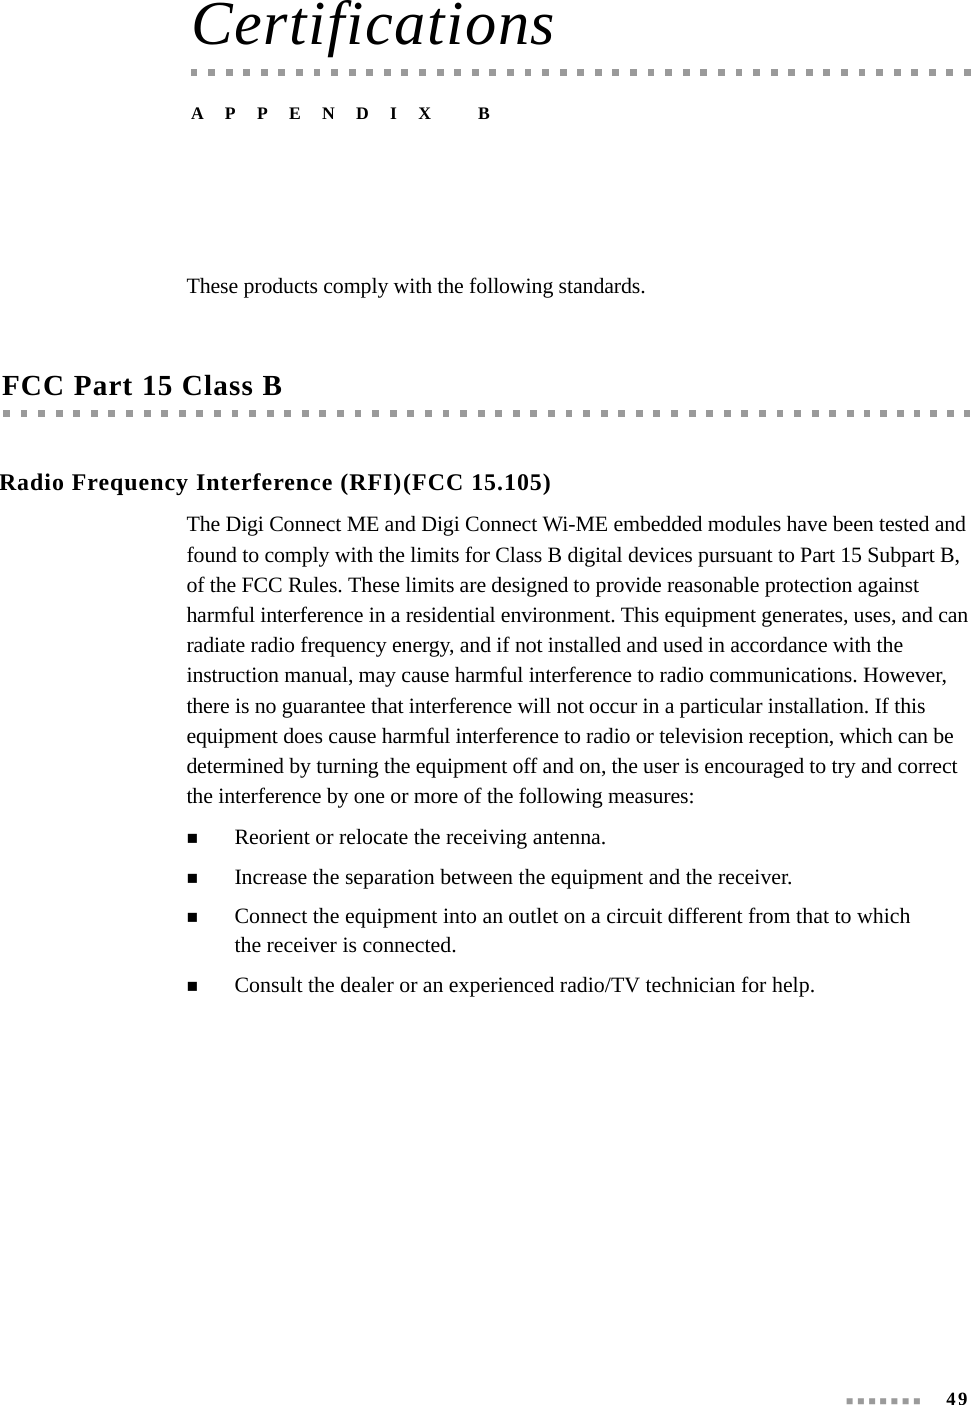  49CertificationsAPPENDIX BThese products comply with the following standards.FCC Part 15 Class BRadio Frequency Interference (RFI)(FCC 15.105)The Digi Connect ME and Digi Connect Wi-ME embedded modules have been tested and found to comply with the limits for Class B digital devices pursuant to Part 15 Subpart B, of the FCC Rules. These limits are designed to provide reasonable protection against harmful interference in a residential environment. This equipment generates, uses, and can radiate radio frequency energy, and if not installed and used in accordance with the instruction manual, may cause harmful interference to radio communications. However, there is no guarantee that interference will not occur in a particular installation. If this equipment does cause harmful interference to radio or television reception, which can be determined by turning the equipment off and on, the user is encouraged to try and correct the interference by one or more of the following measures:Reorient or relocate the receiving antenna.Increase the separation between the equipment and the receiver.Connect the equipment into an outlet on a circuit different from that to which the receiver is connected.Consult the dealer or an experienced radio/TV technician for help.